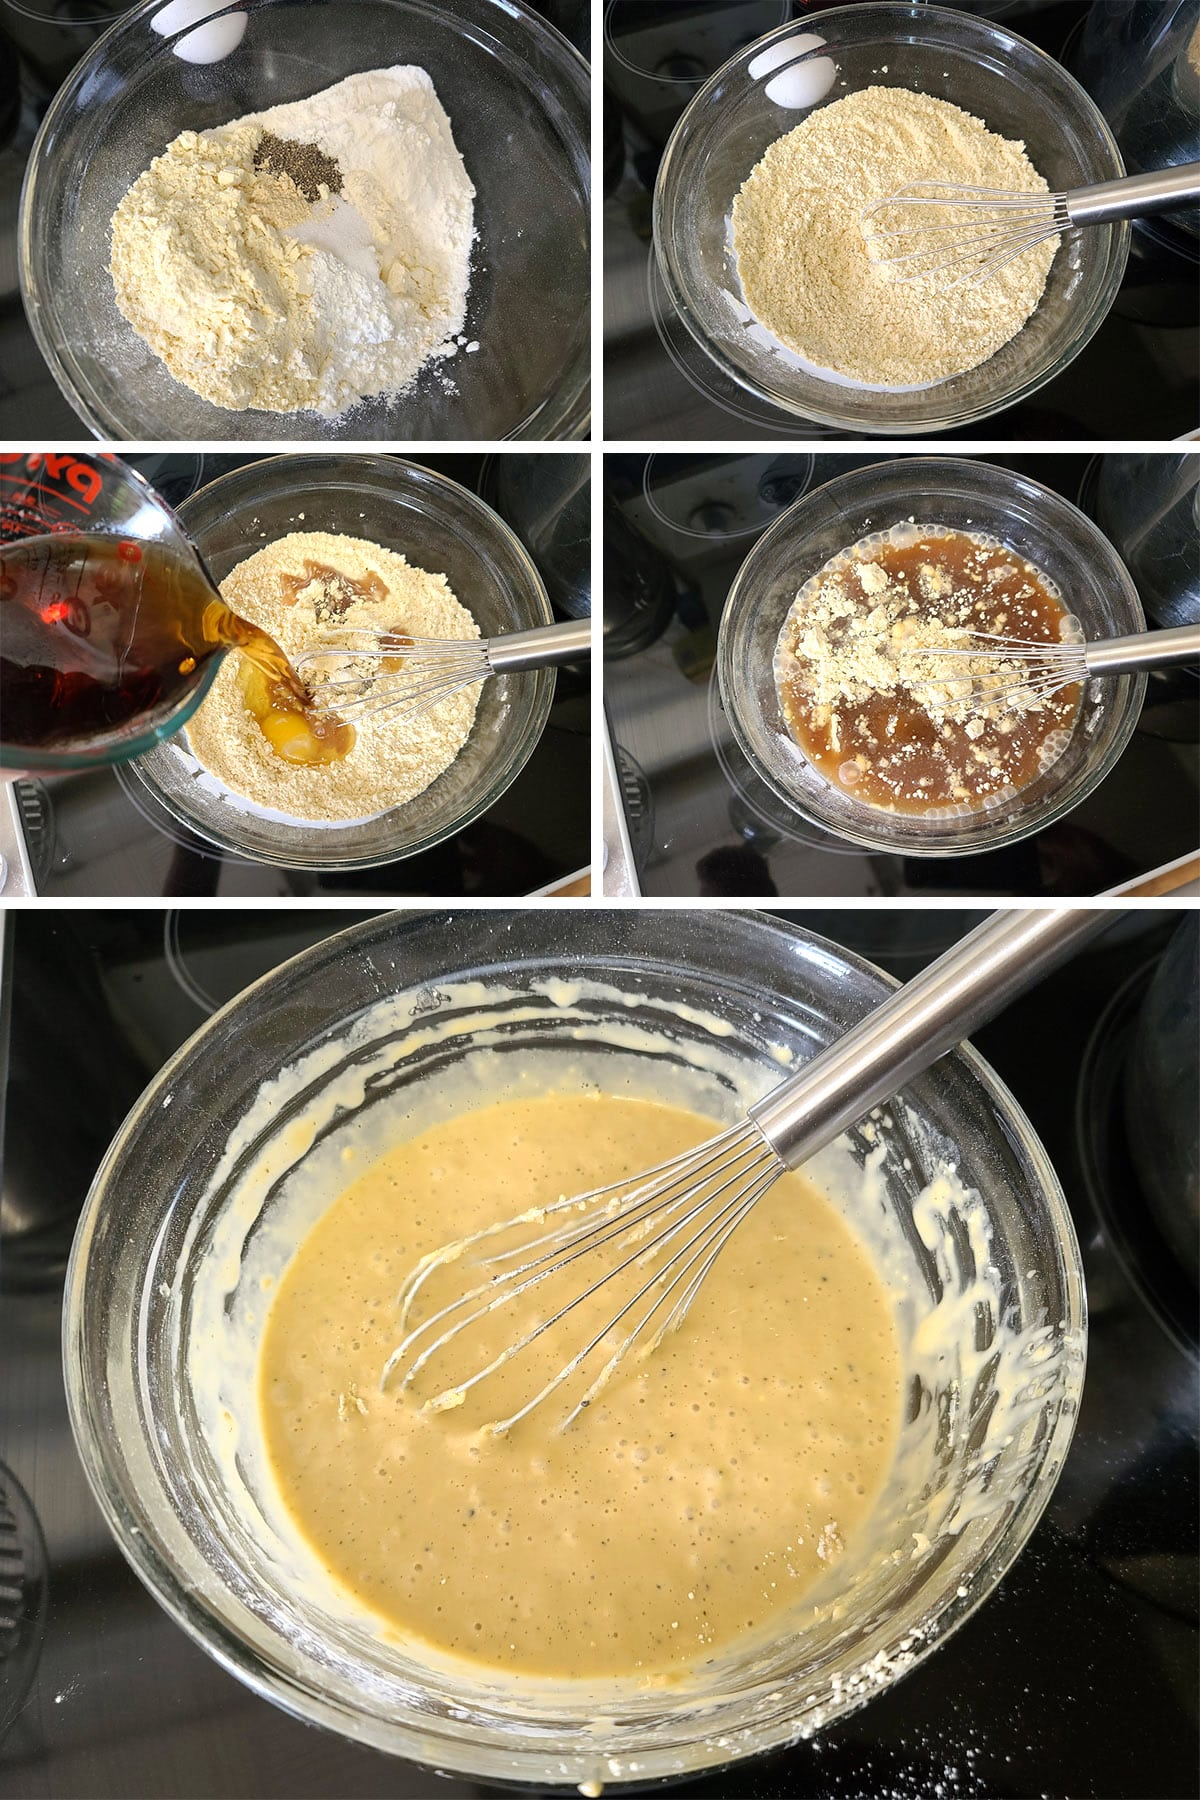 5 part image showing the gluten free beer batter being mixed.